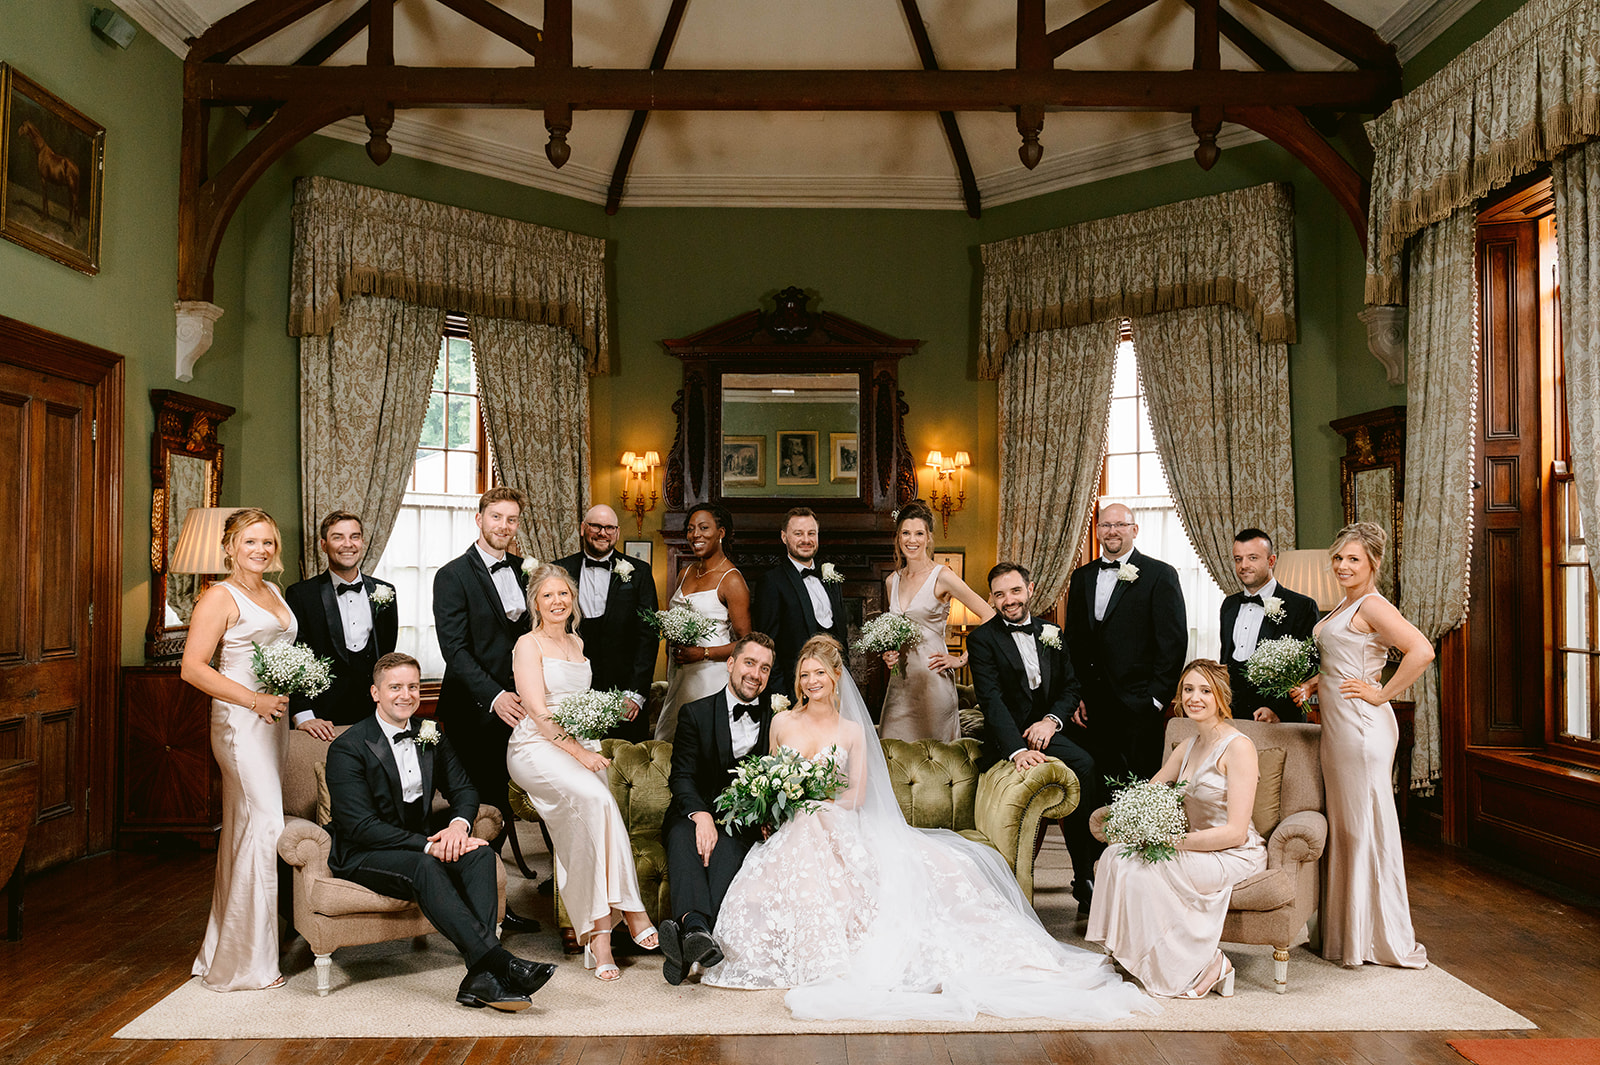 bridal party editorial style group photos at castle leslie in ireland